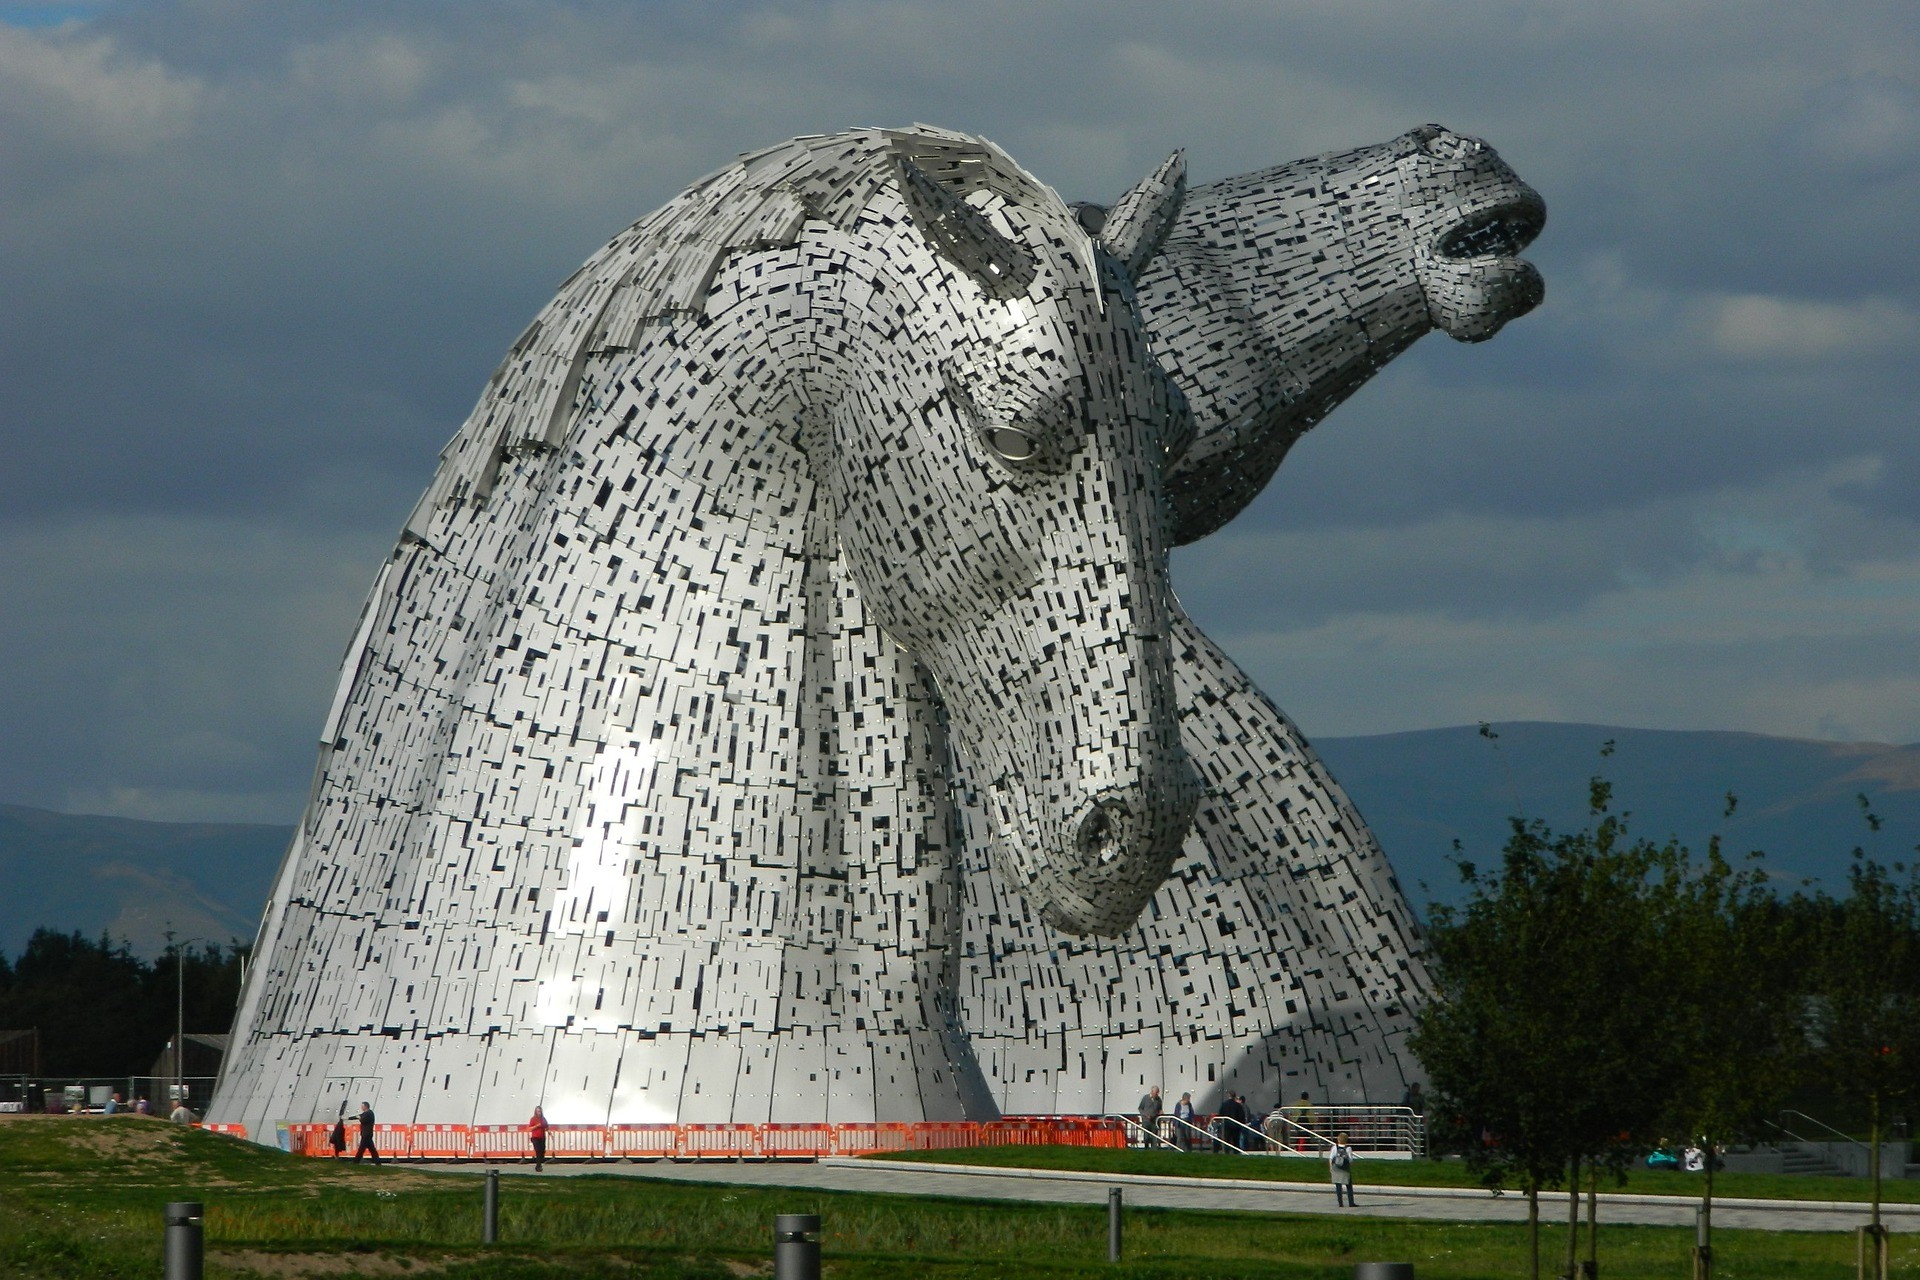 The Kelpies monument at The Helix park near Falkirk in Scotland